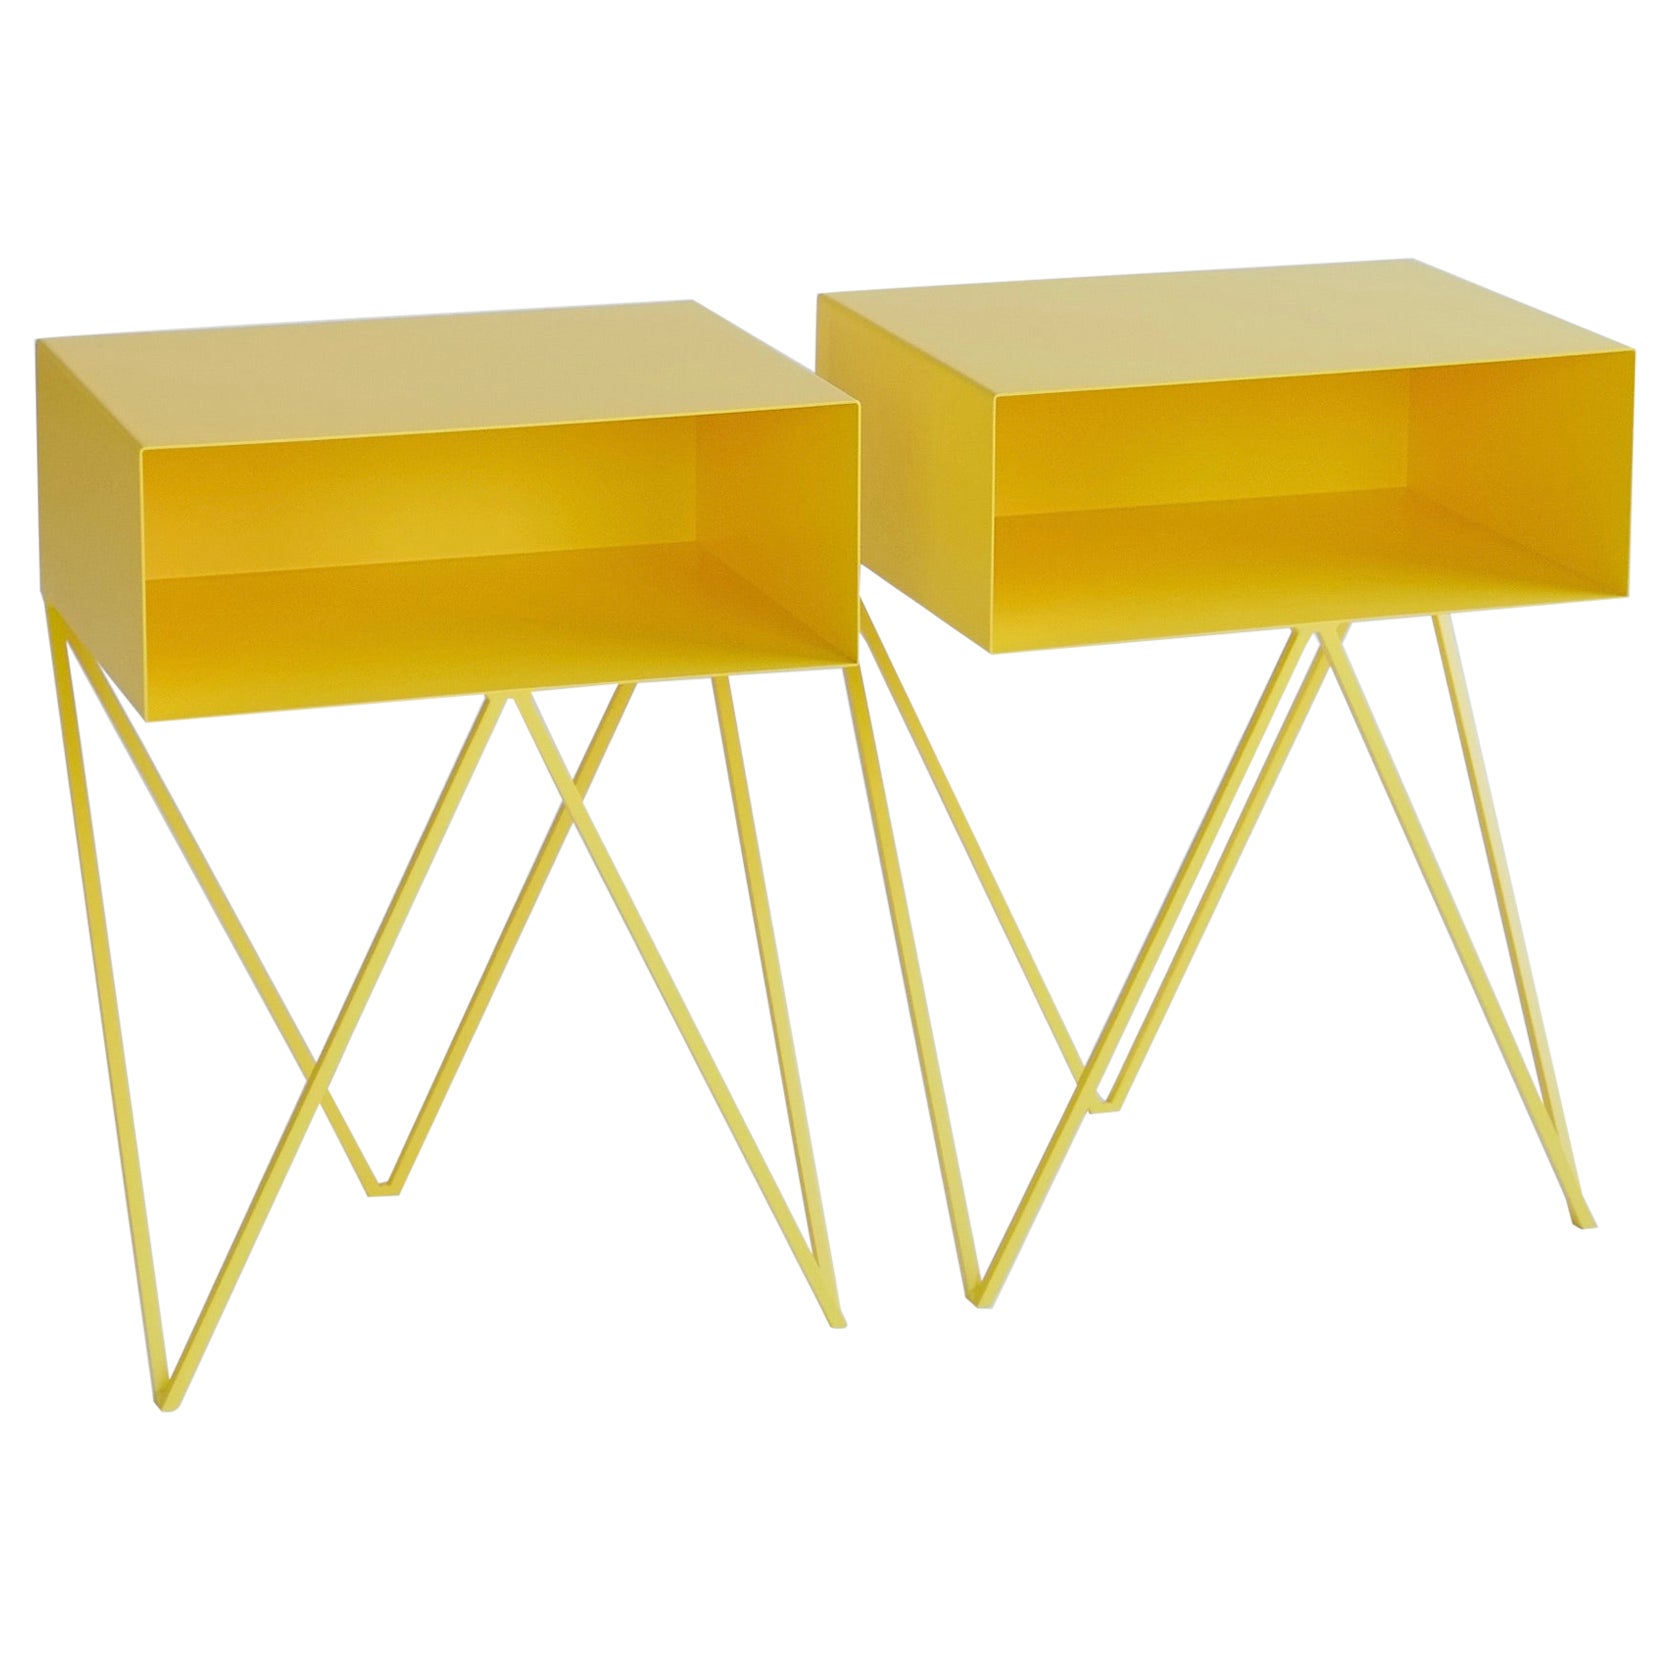 Pair of Yellow Robot Bedside Tables - Nightstands For Sale